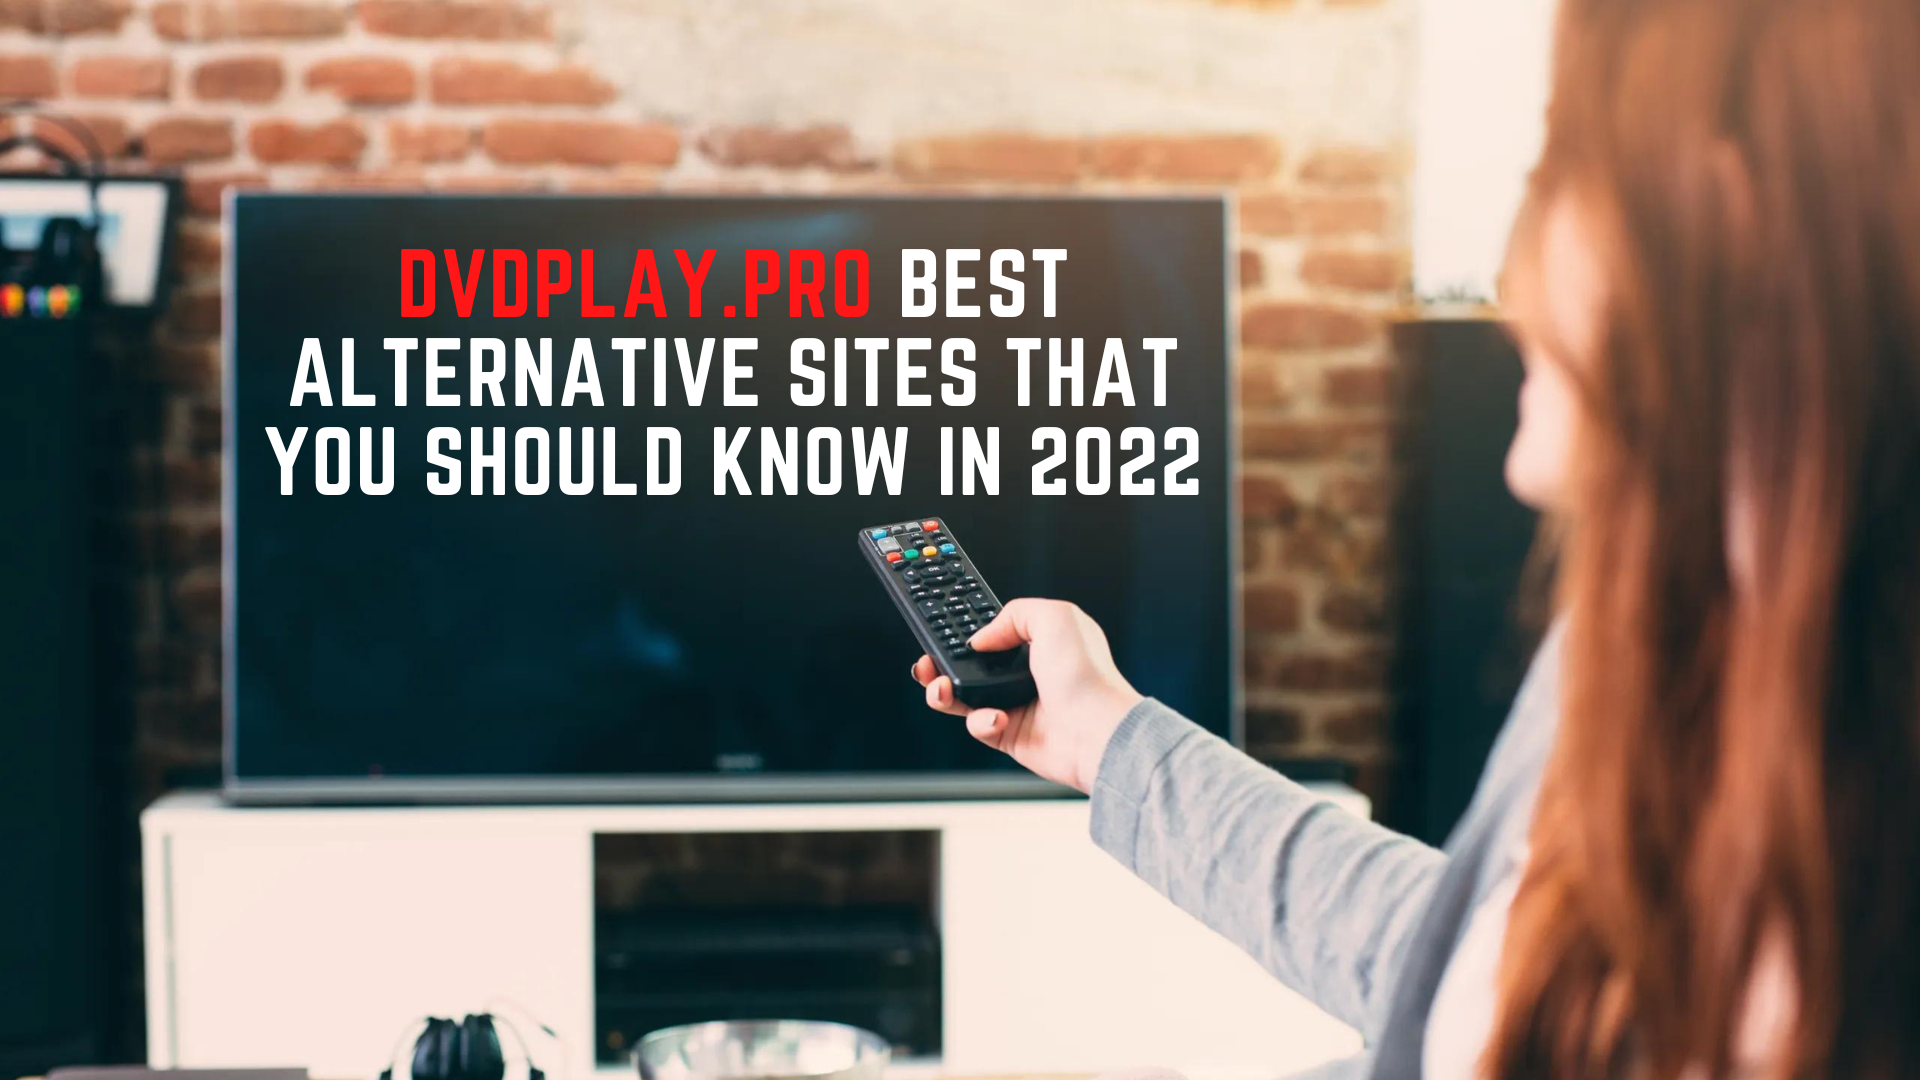 DVDPlay.Pro Best Alternative Sites That You Should Know In 2022